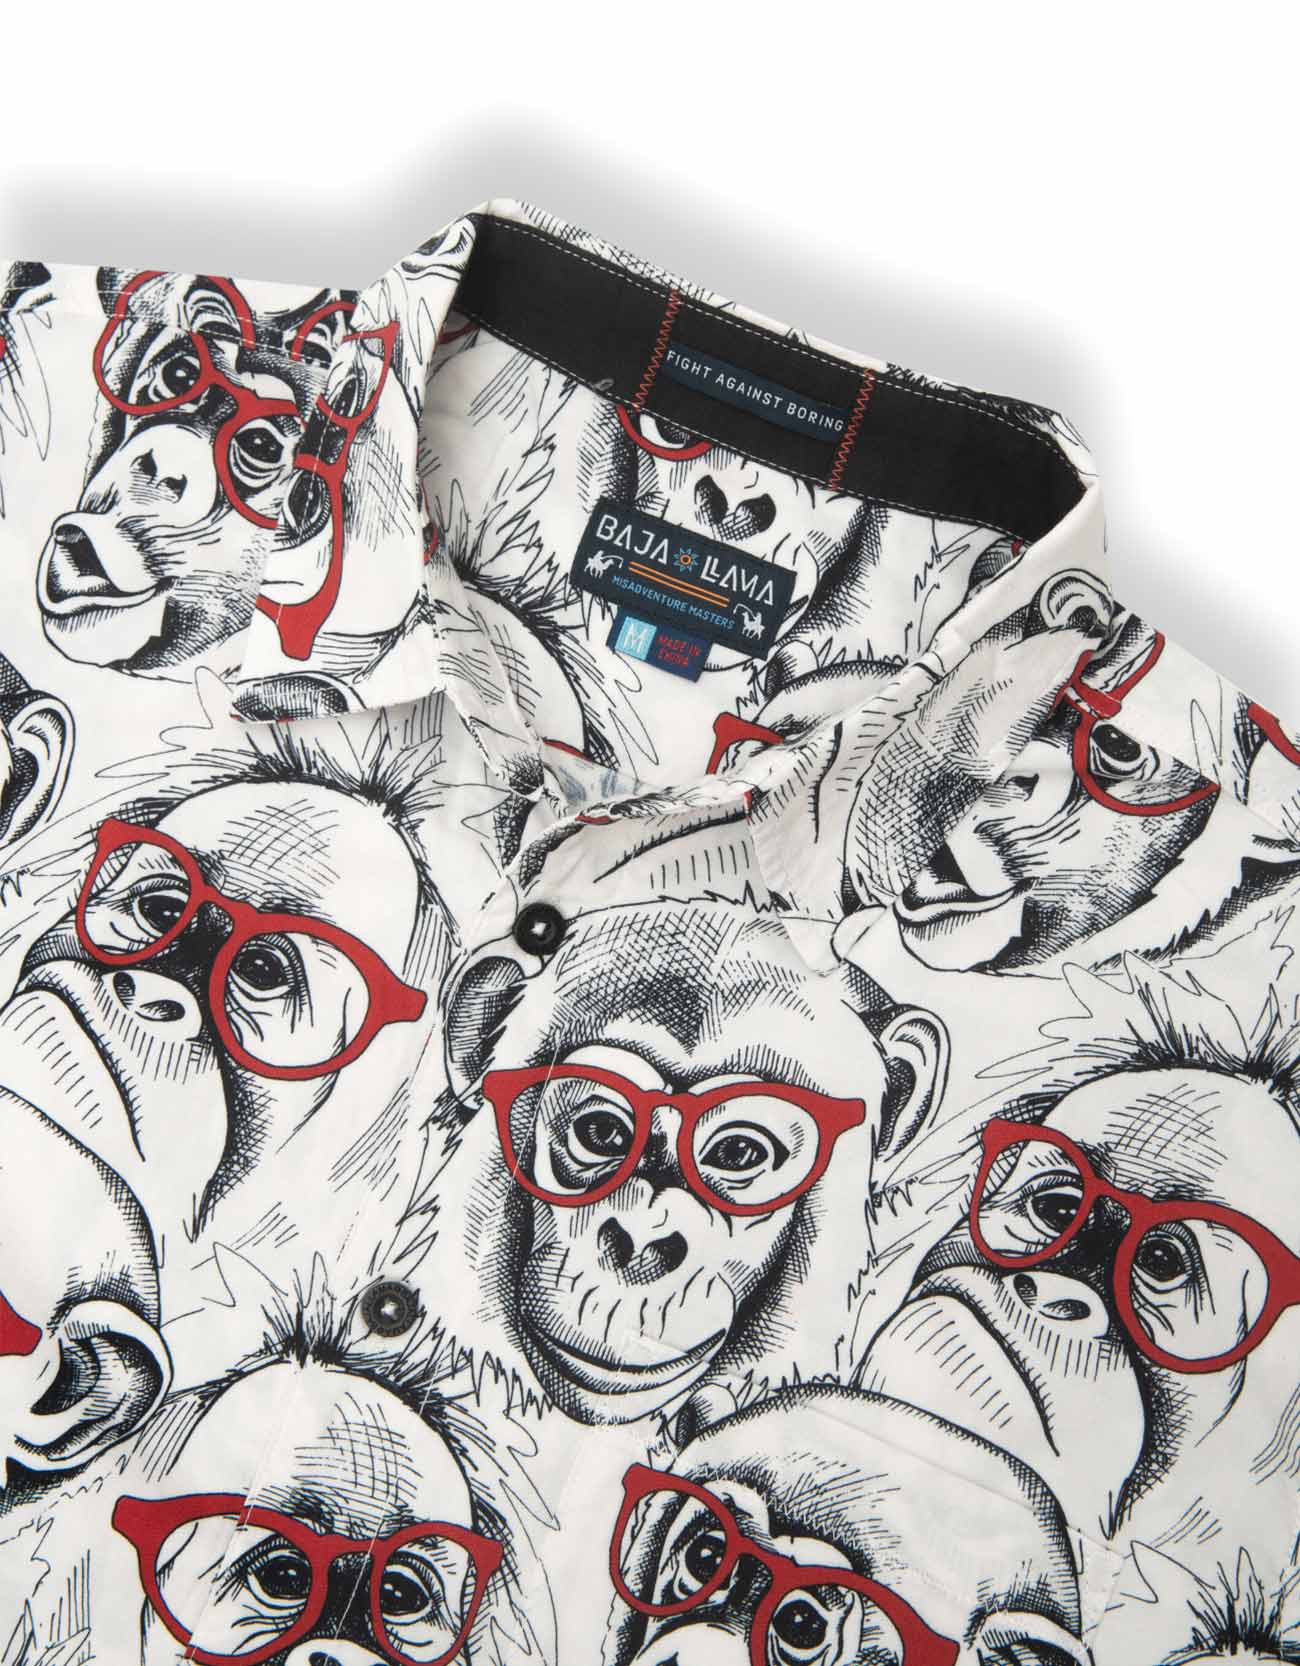 Black and white button up featuring monkey wearing red eyeglasses